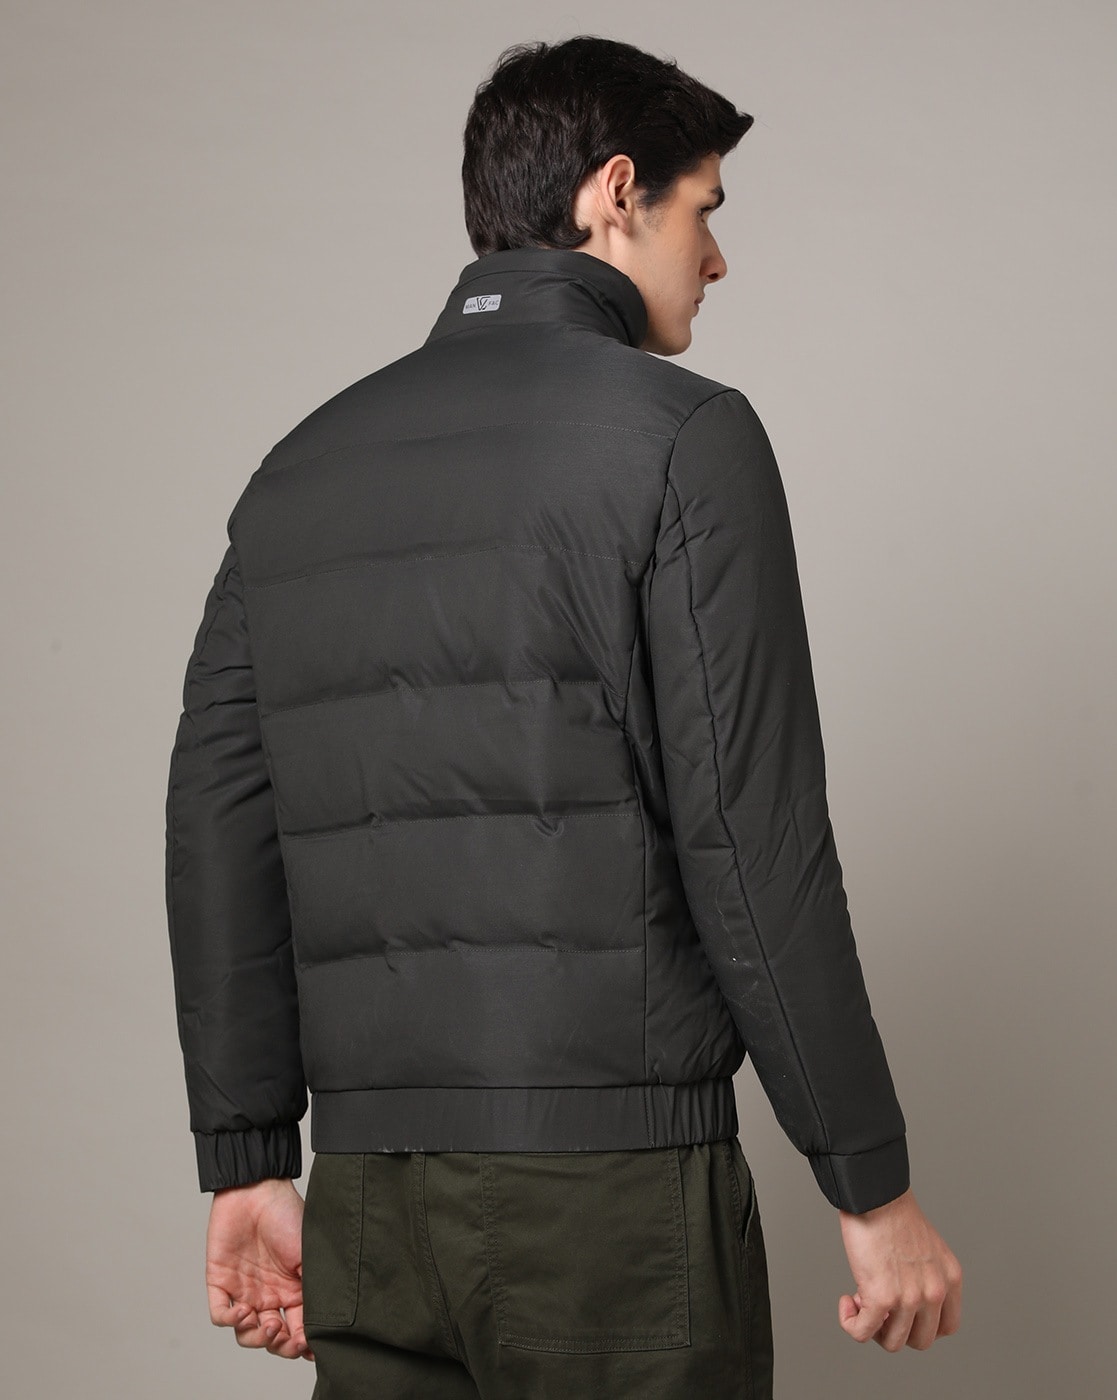 Oak+Fort Oak + Fort LONG PUFFER JACKET $188 Winter Sale: Up to 50% Off.  Prices as marked. OW-9505-W Black Blue Grey;Thyme Green Olive OW-9505-W  $288 $188.00 288.00